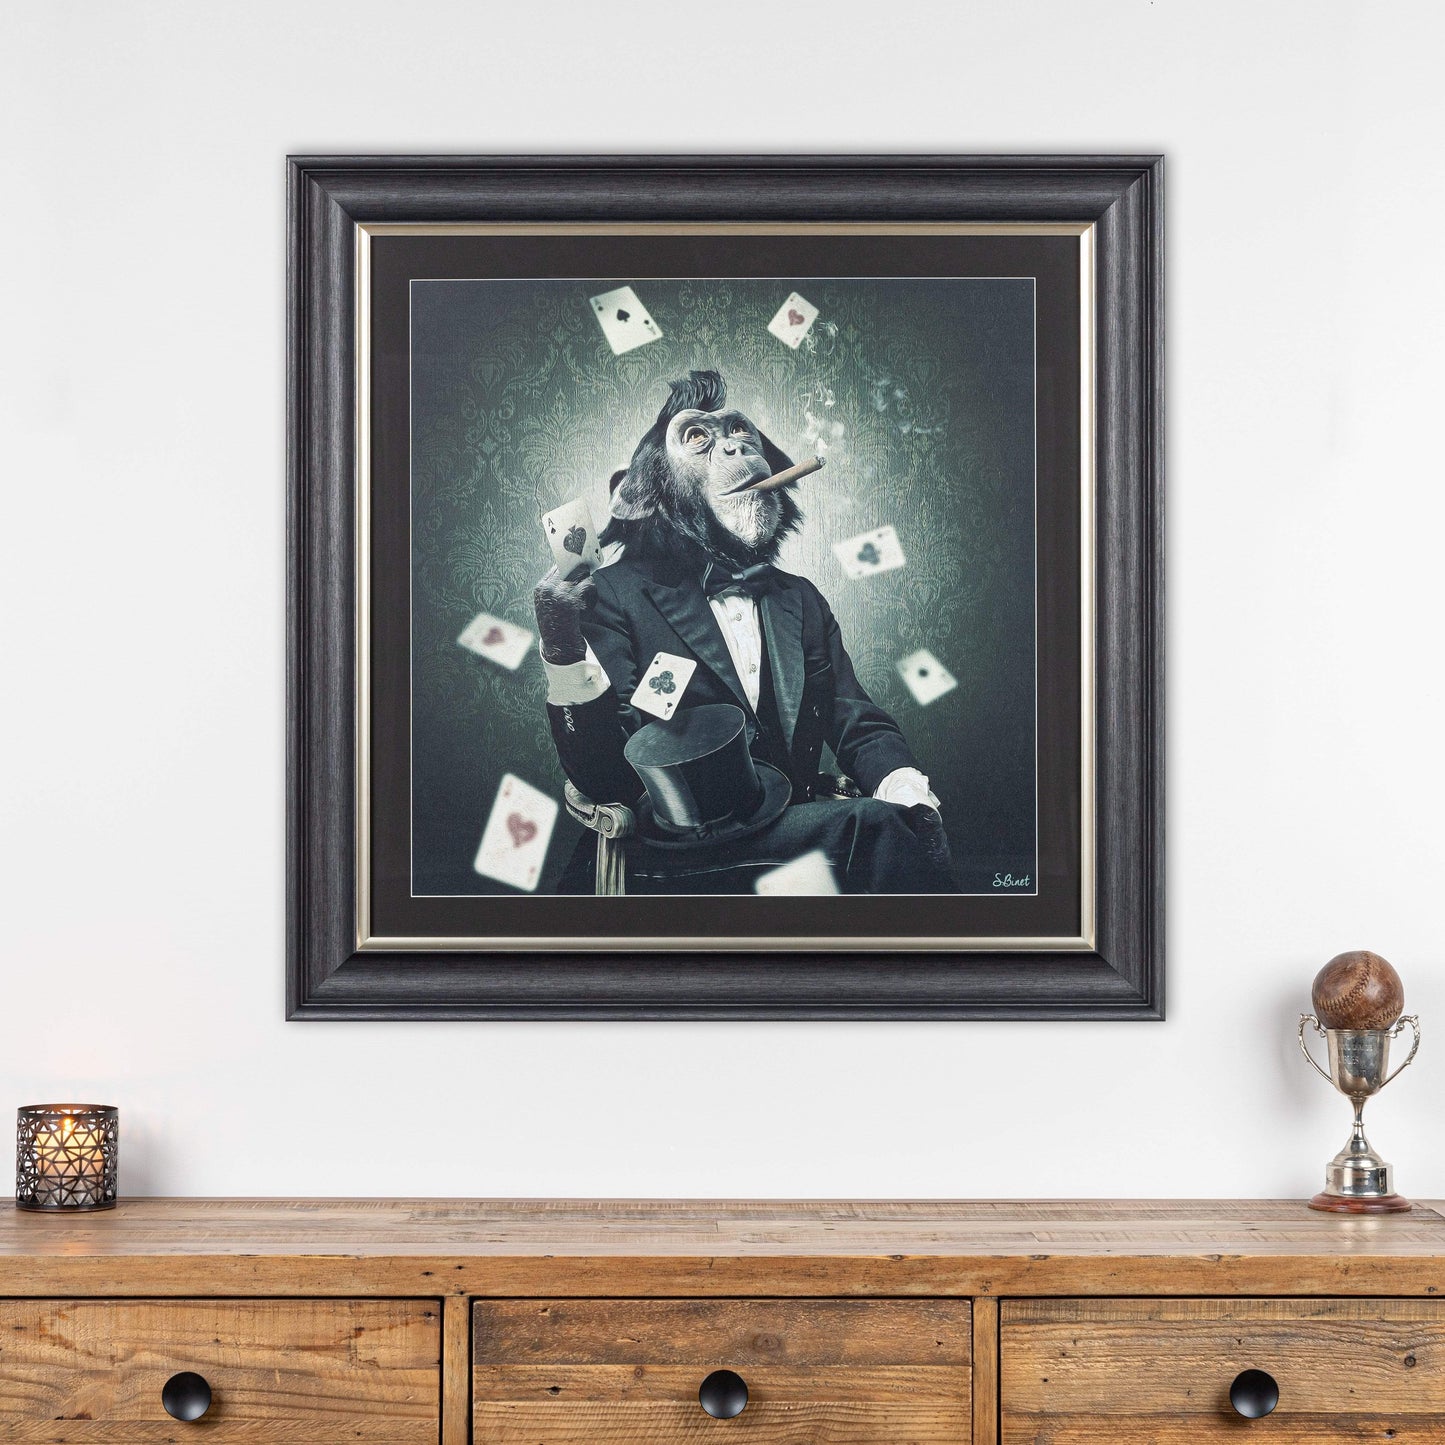 Pictures  -  Vegas Poker Monkey Framed Picture 90 X 90  -  50155642